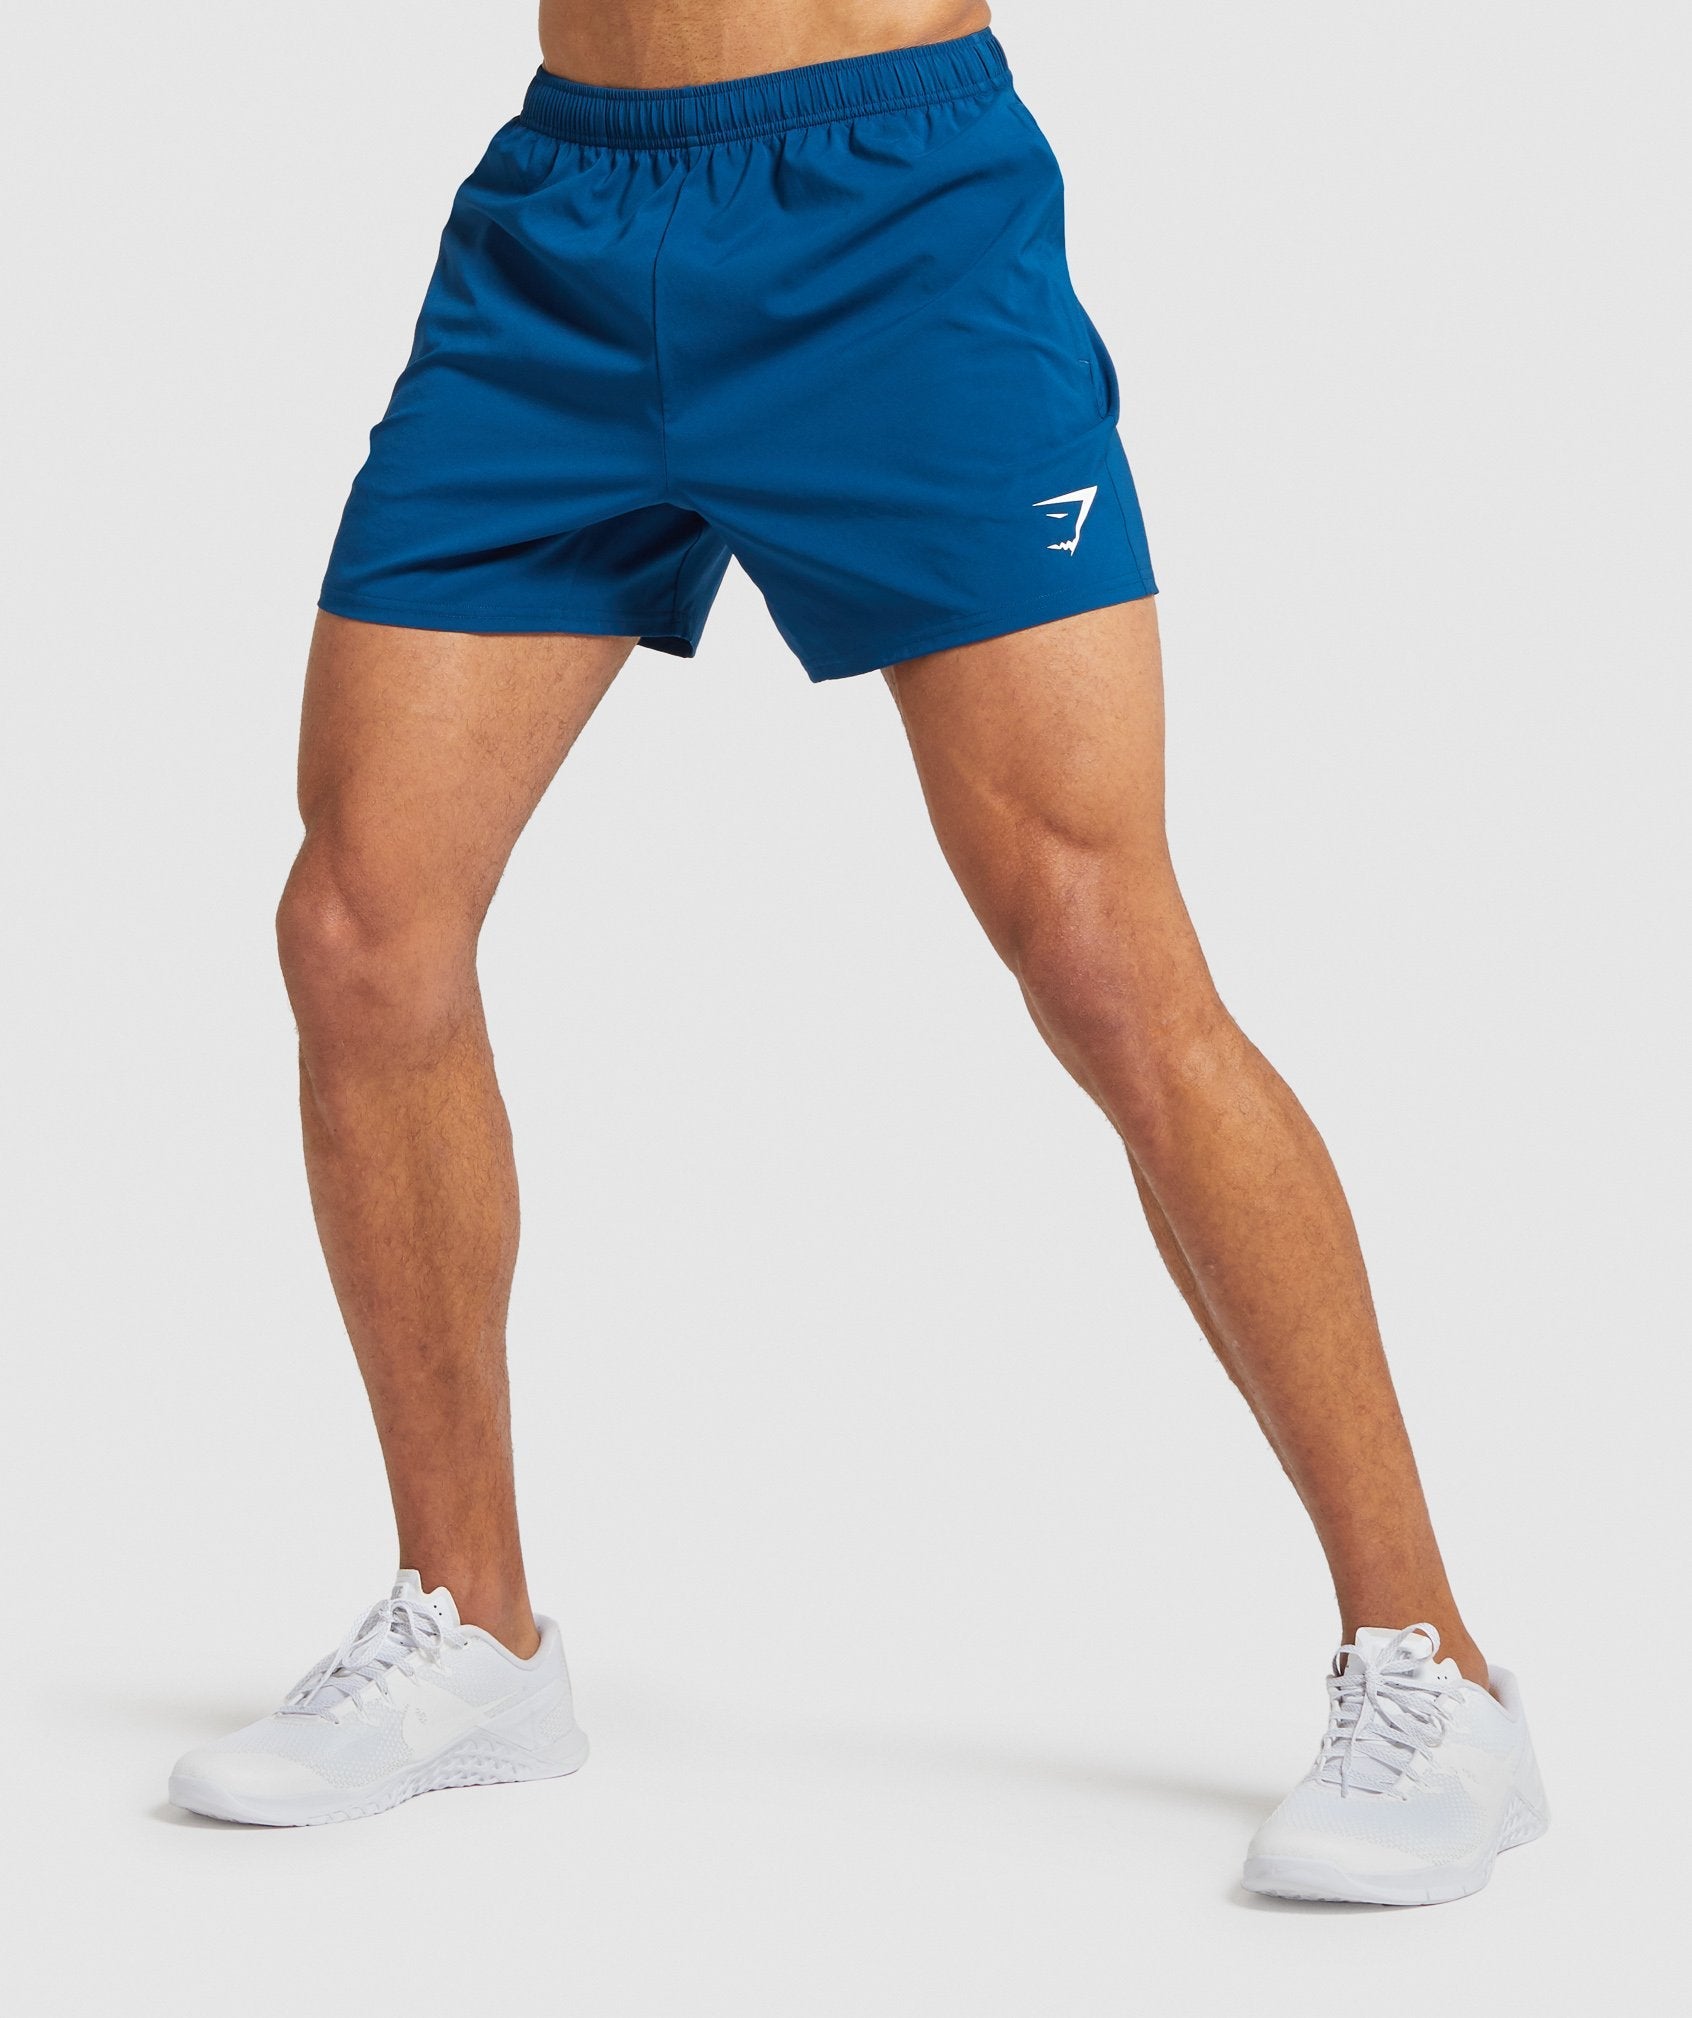 Arrival 5" Shorts in Petrol Blue - view 1